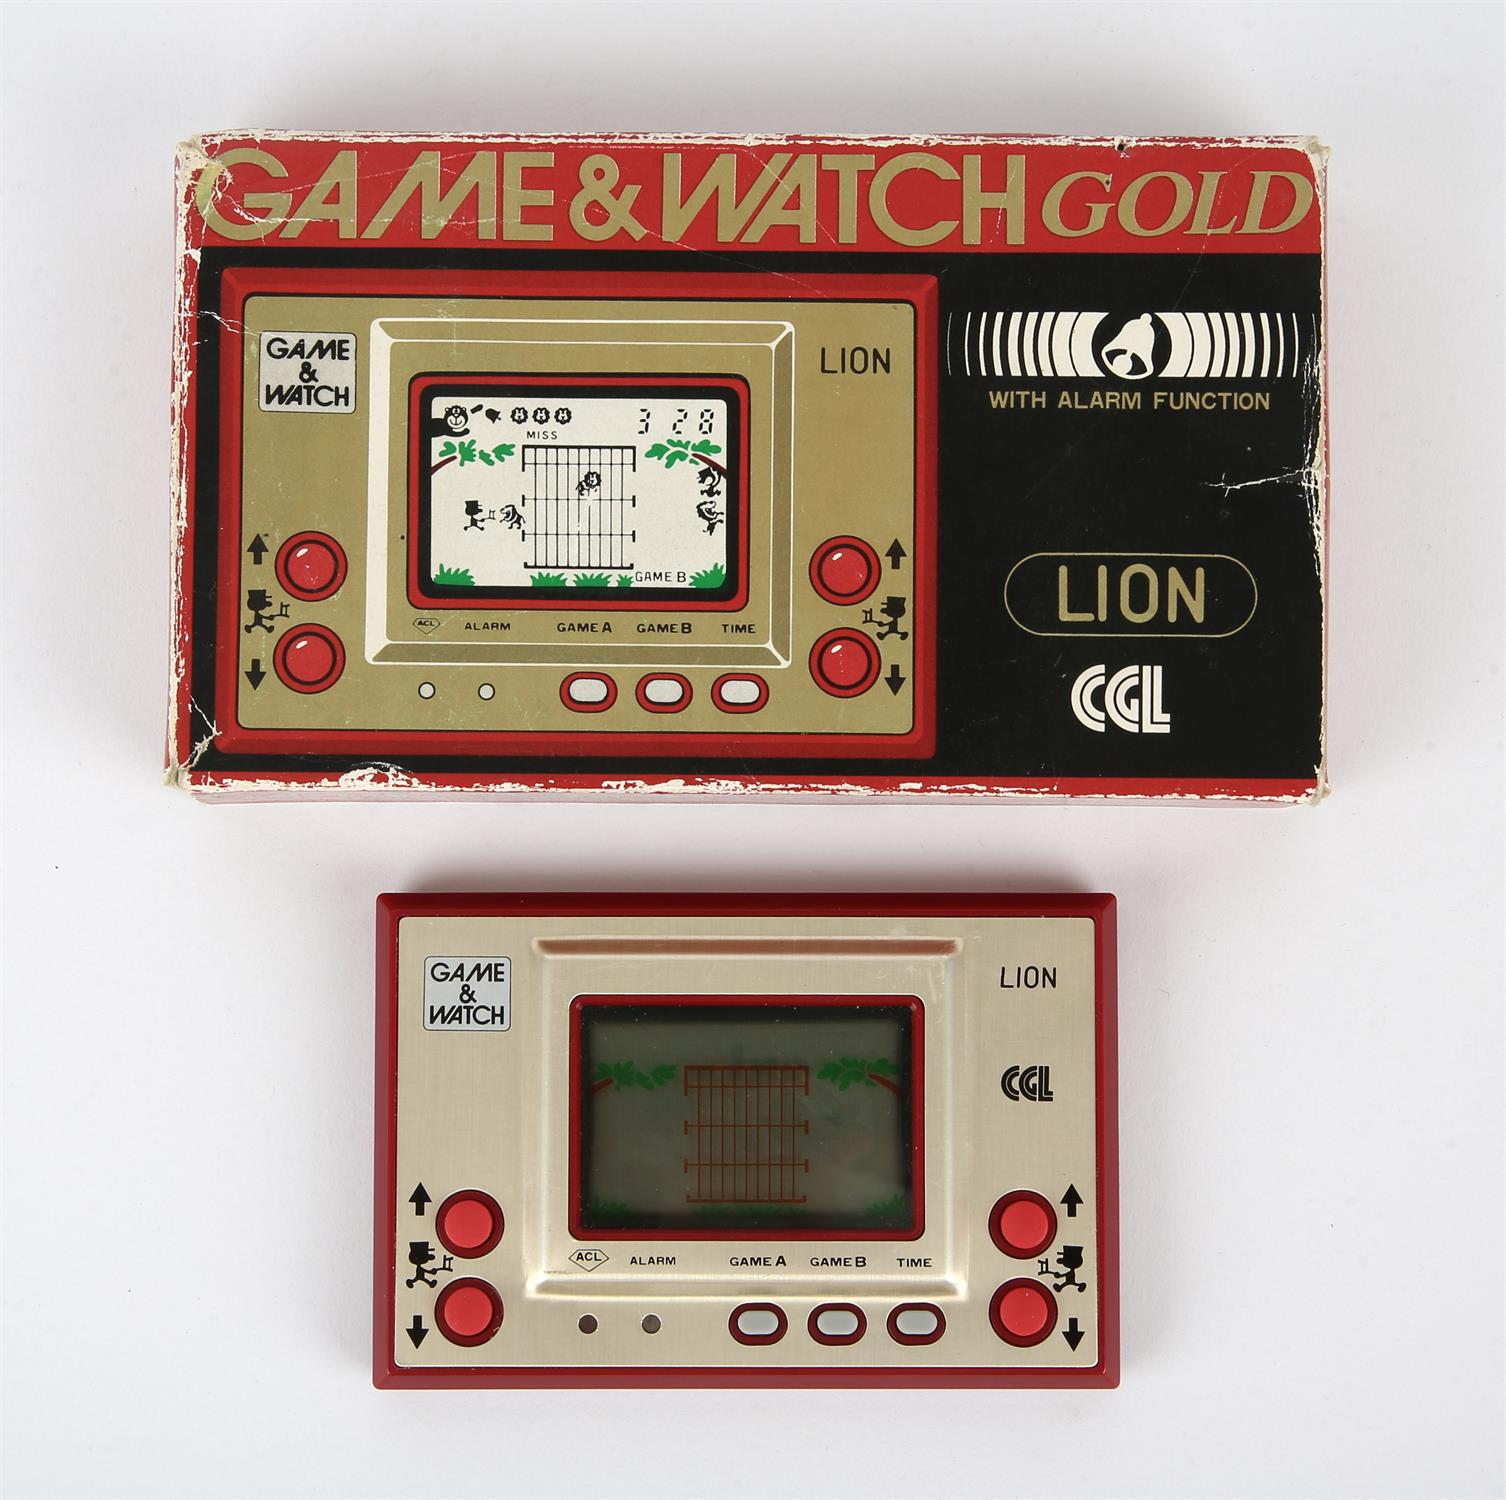 Nintendo Game & Watch Gold Lion [LN-08] handheld console from 1981 (complete and boxed) Item is